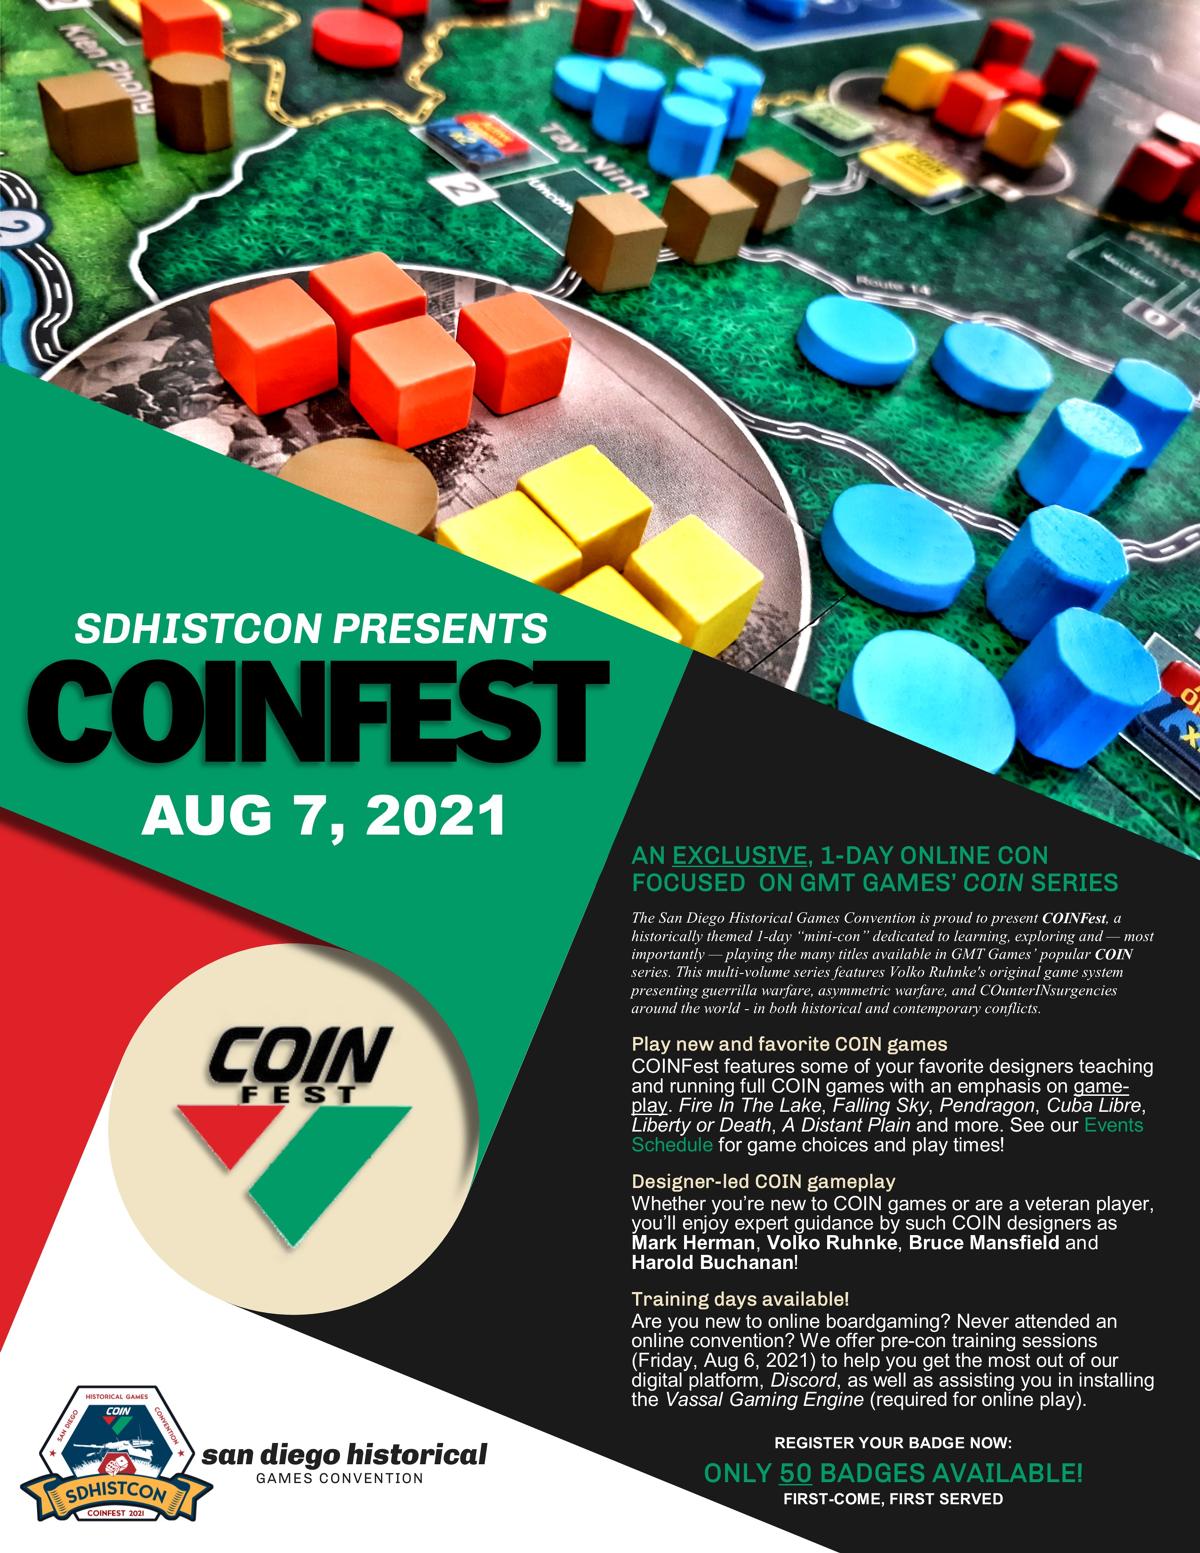 SDHistCon-COINFest-2021---Landing-Page-PN-v3a--page-1-.jpg